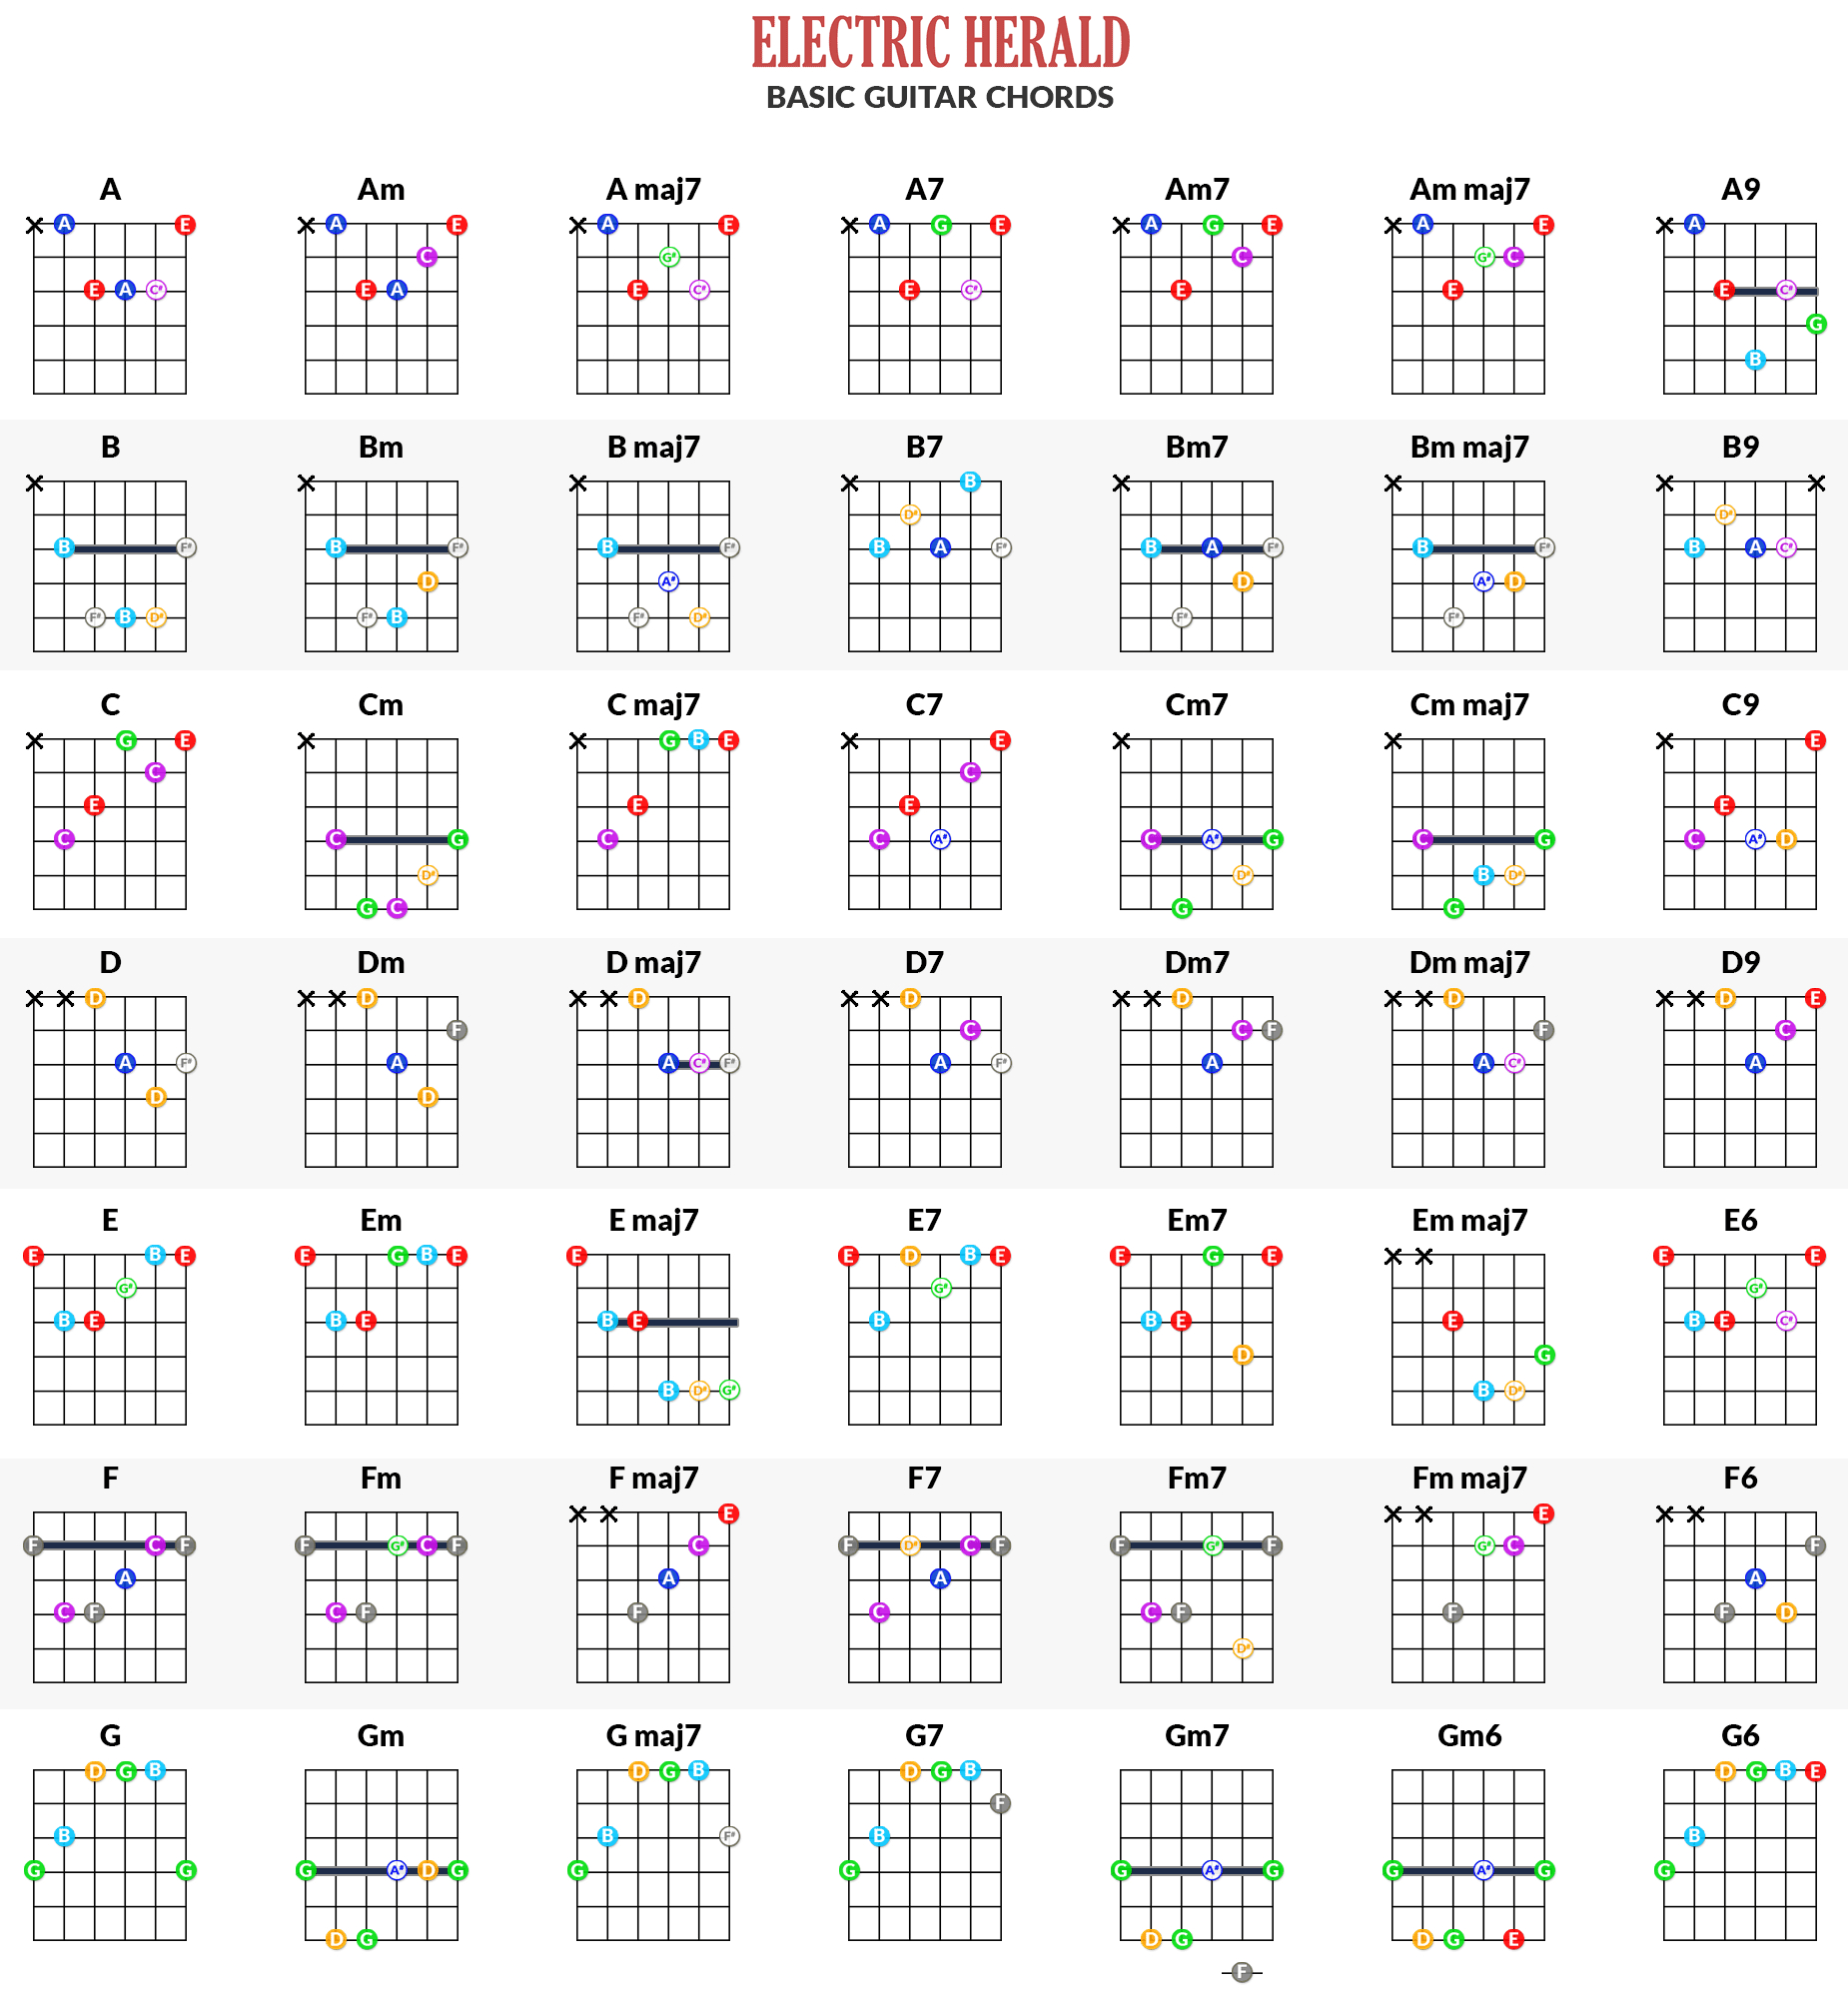 Guitar Notes Diagram Online Guitar Chords Chart Free App Electric Herald